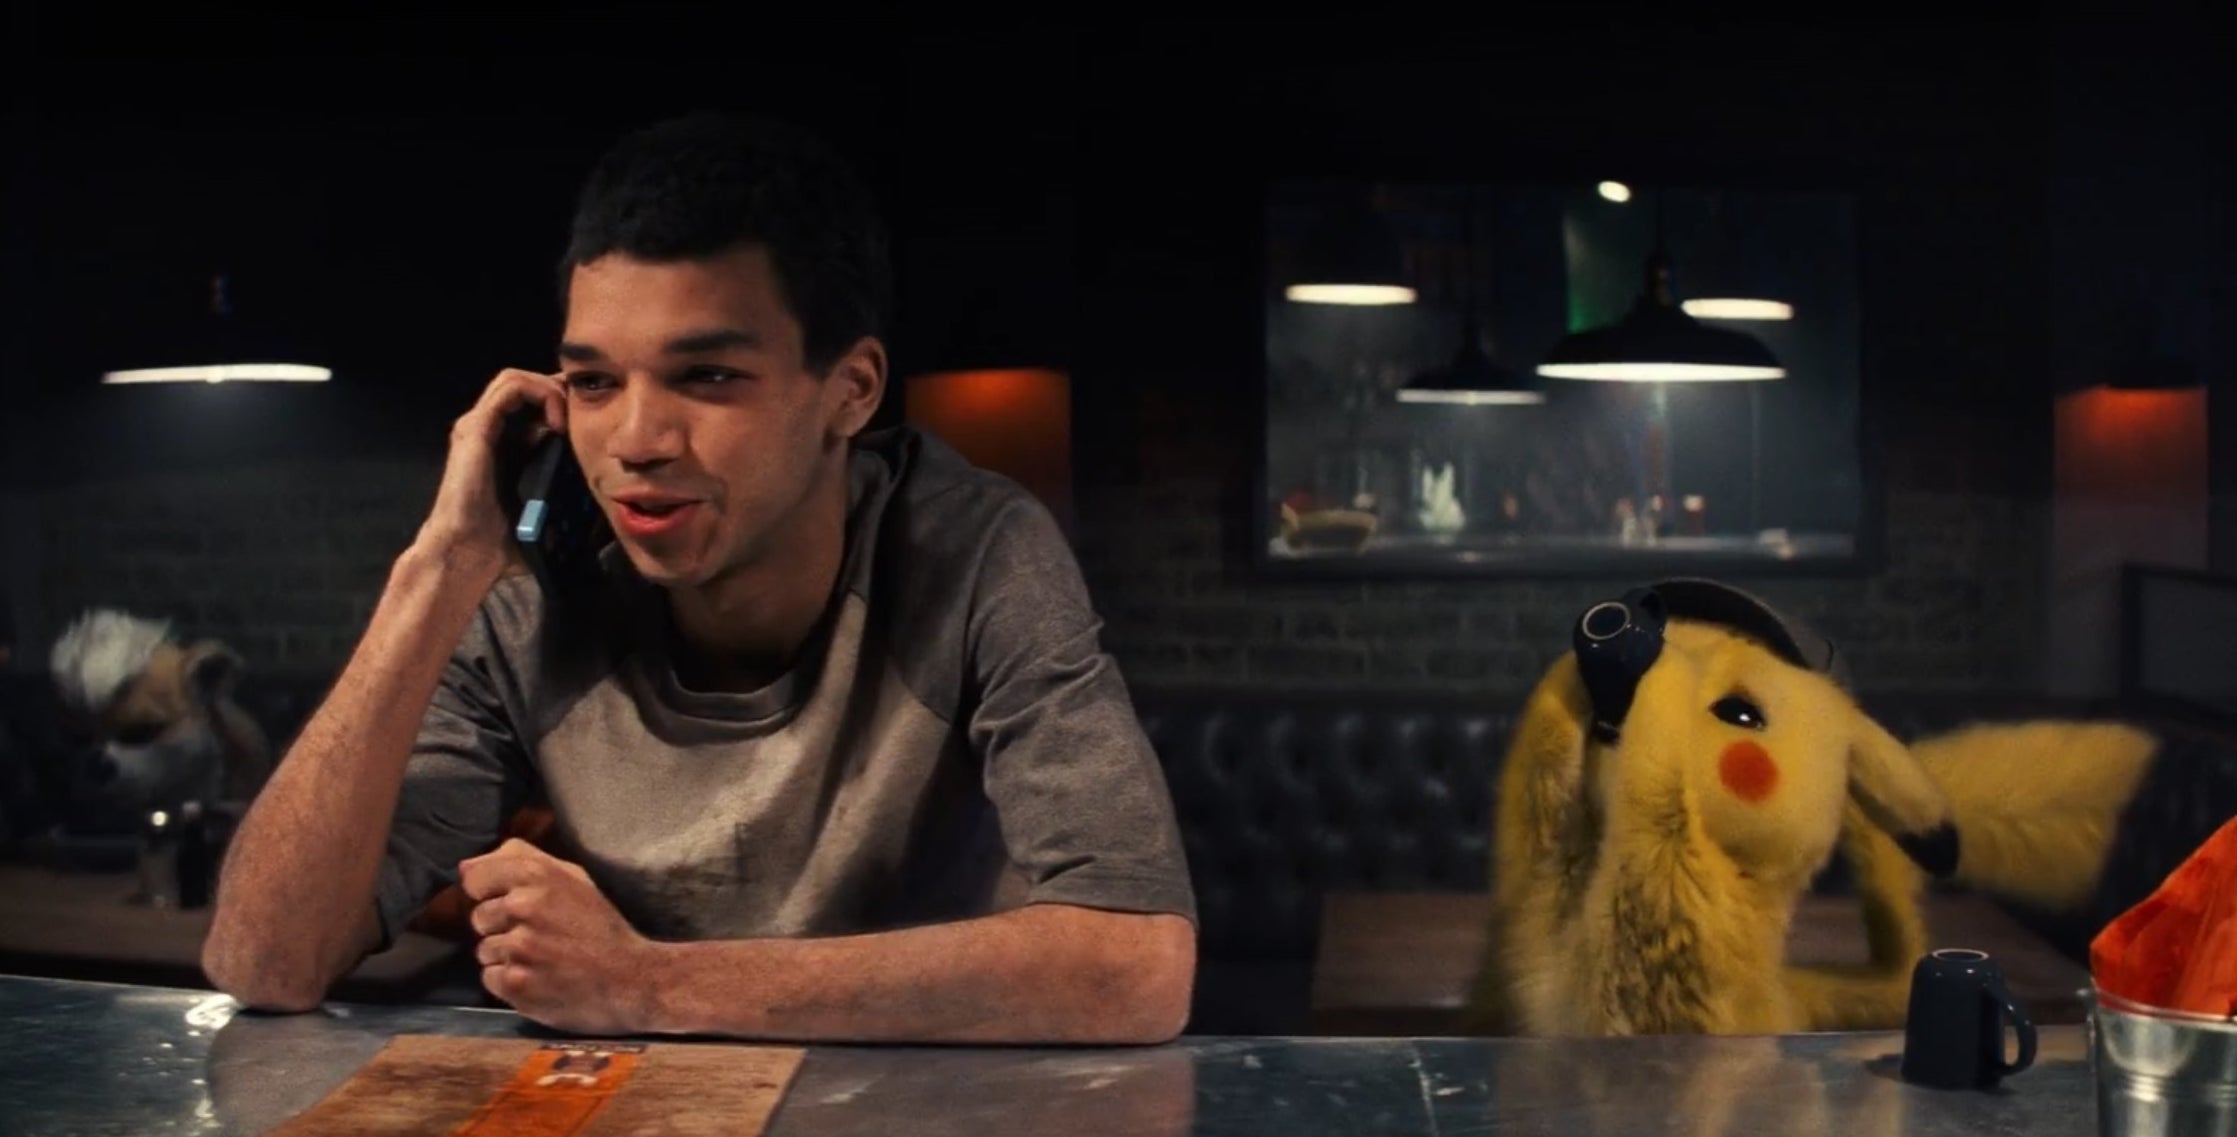 A man on the phone in a diner, next to a yellow Pikachu drinking coffee